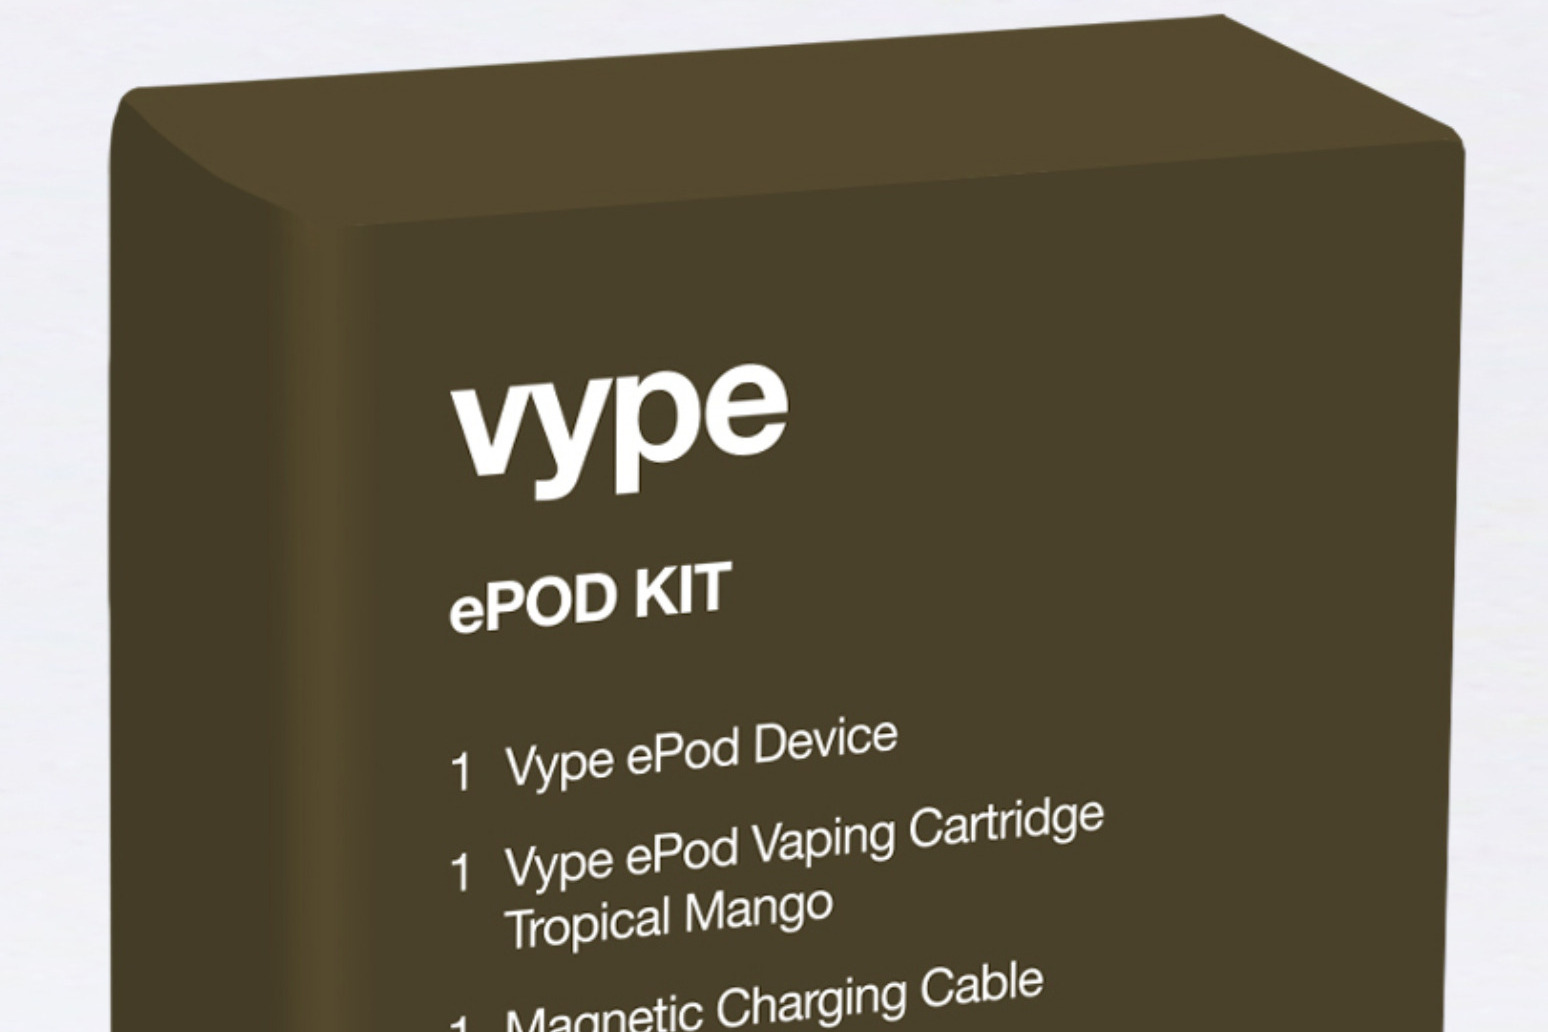 Putting vapes in plain packaging ‘reduces their appeal to children’ 